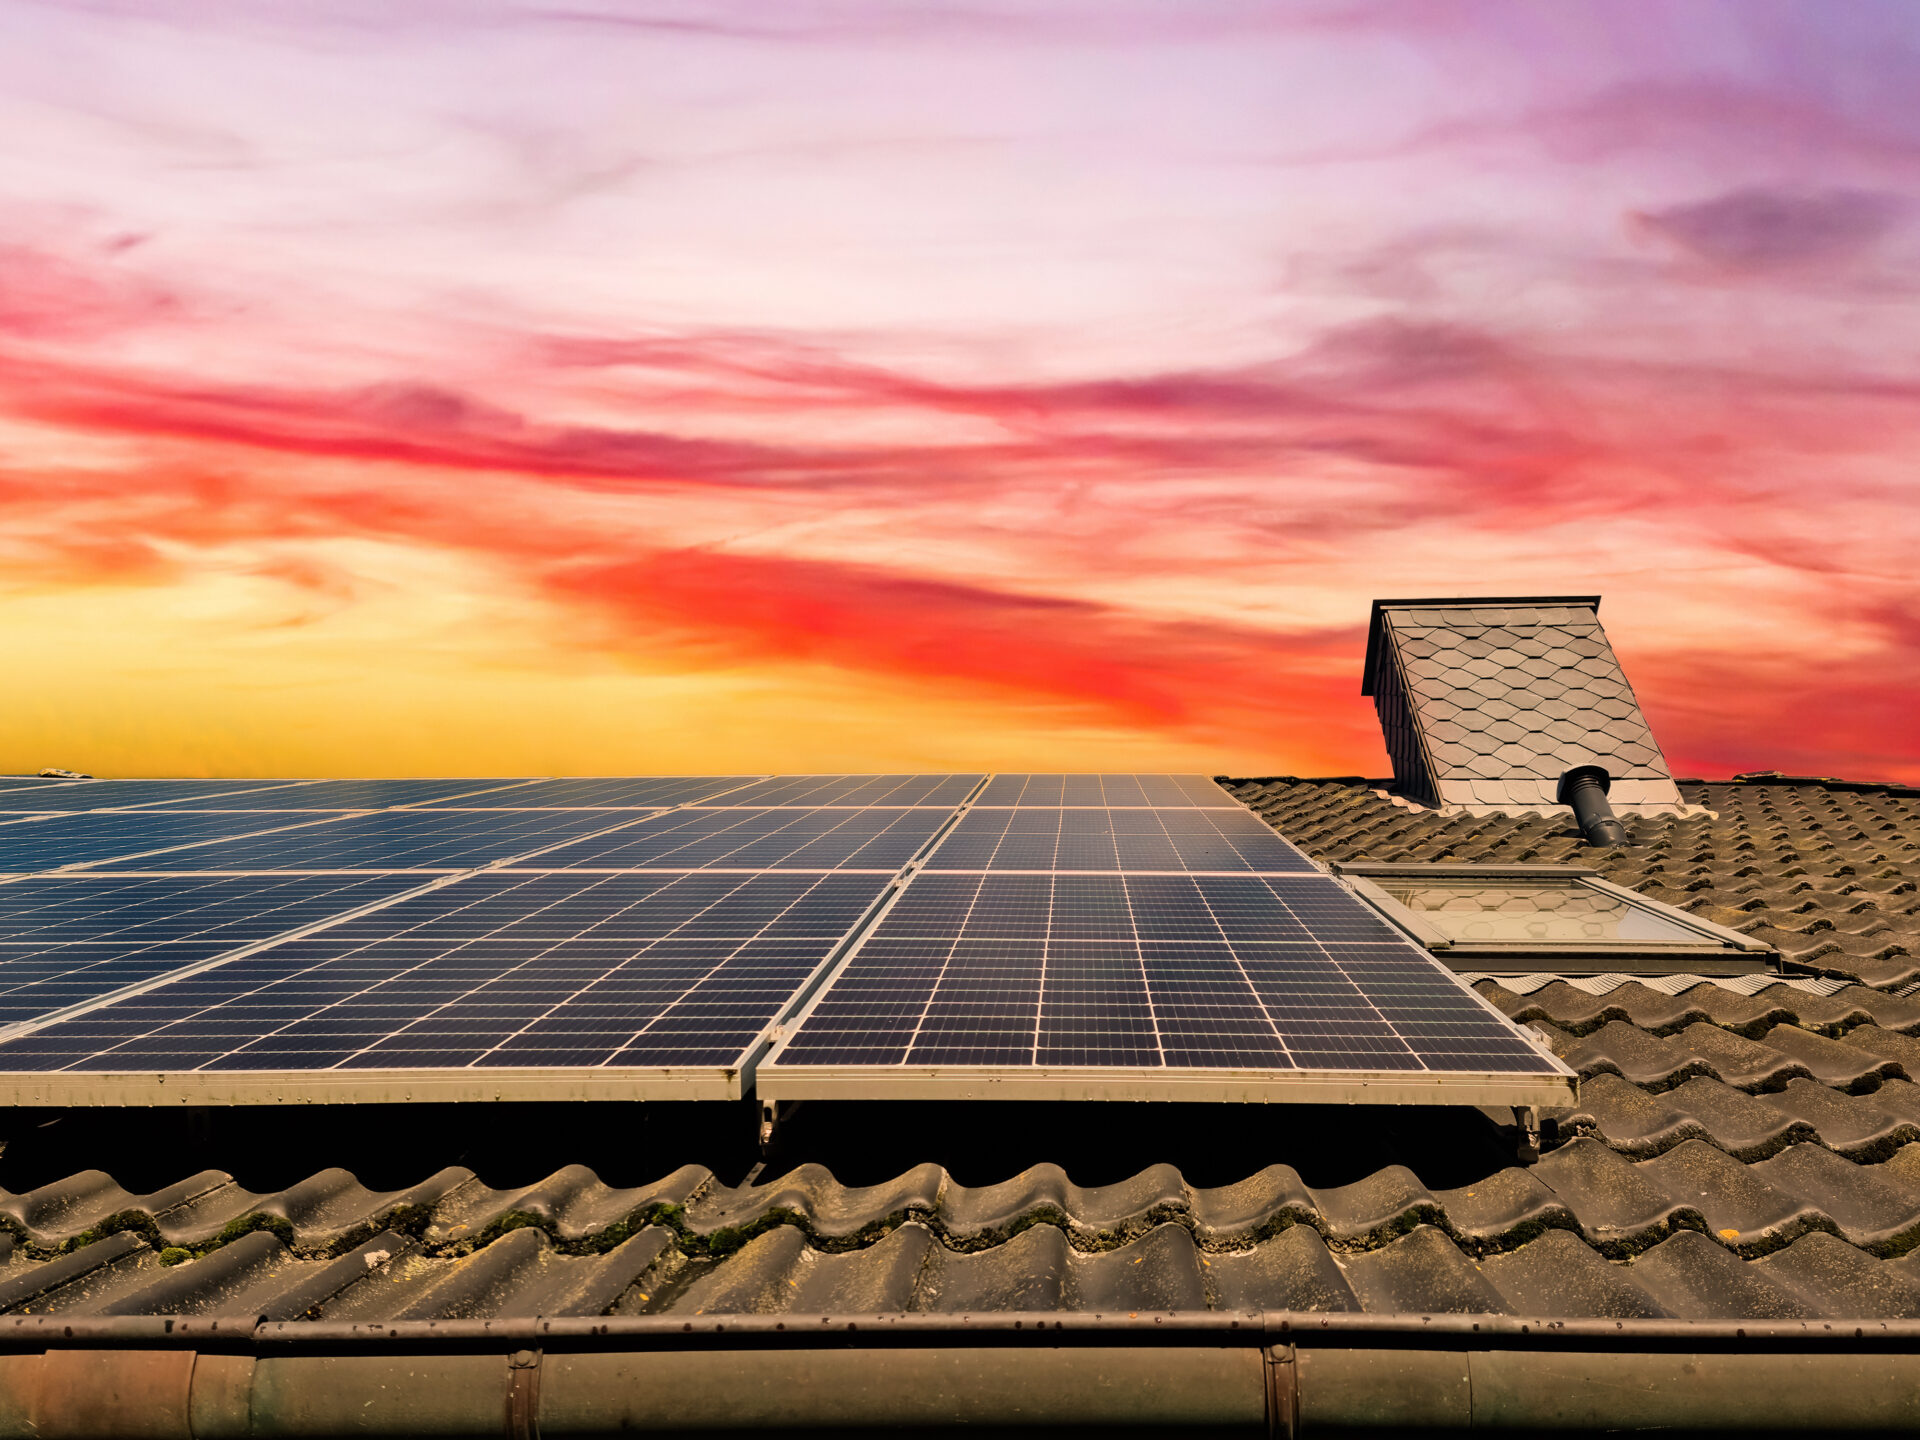 Solar panels on top of a roof at sundown